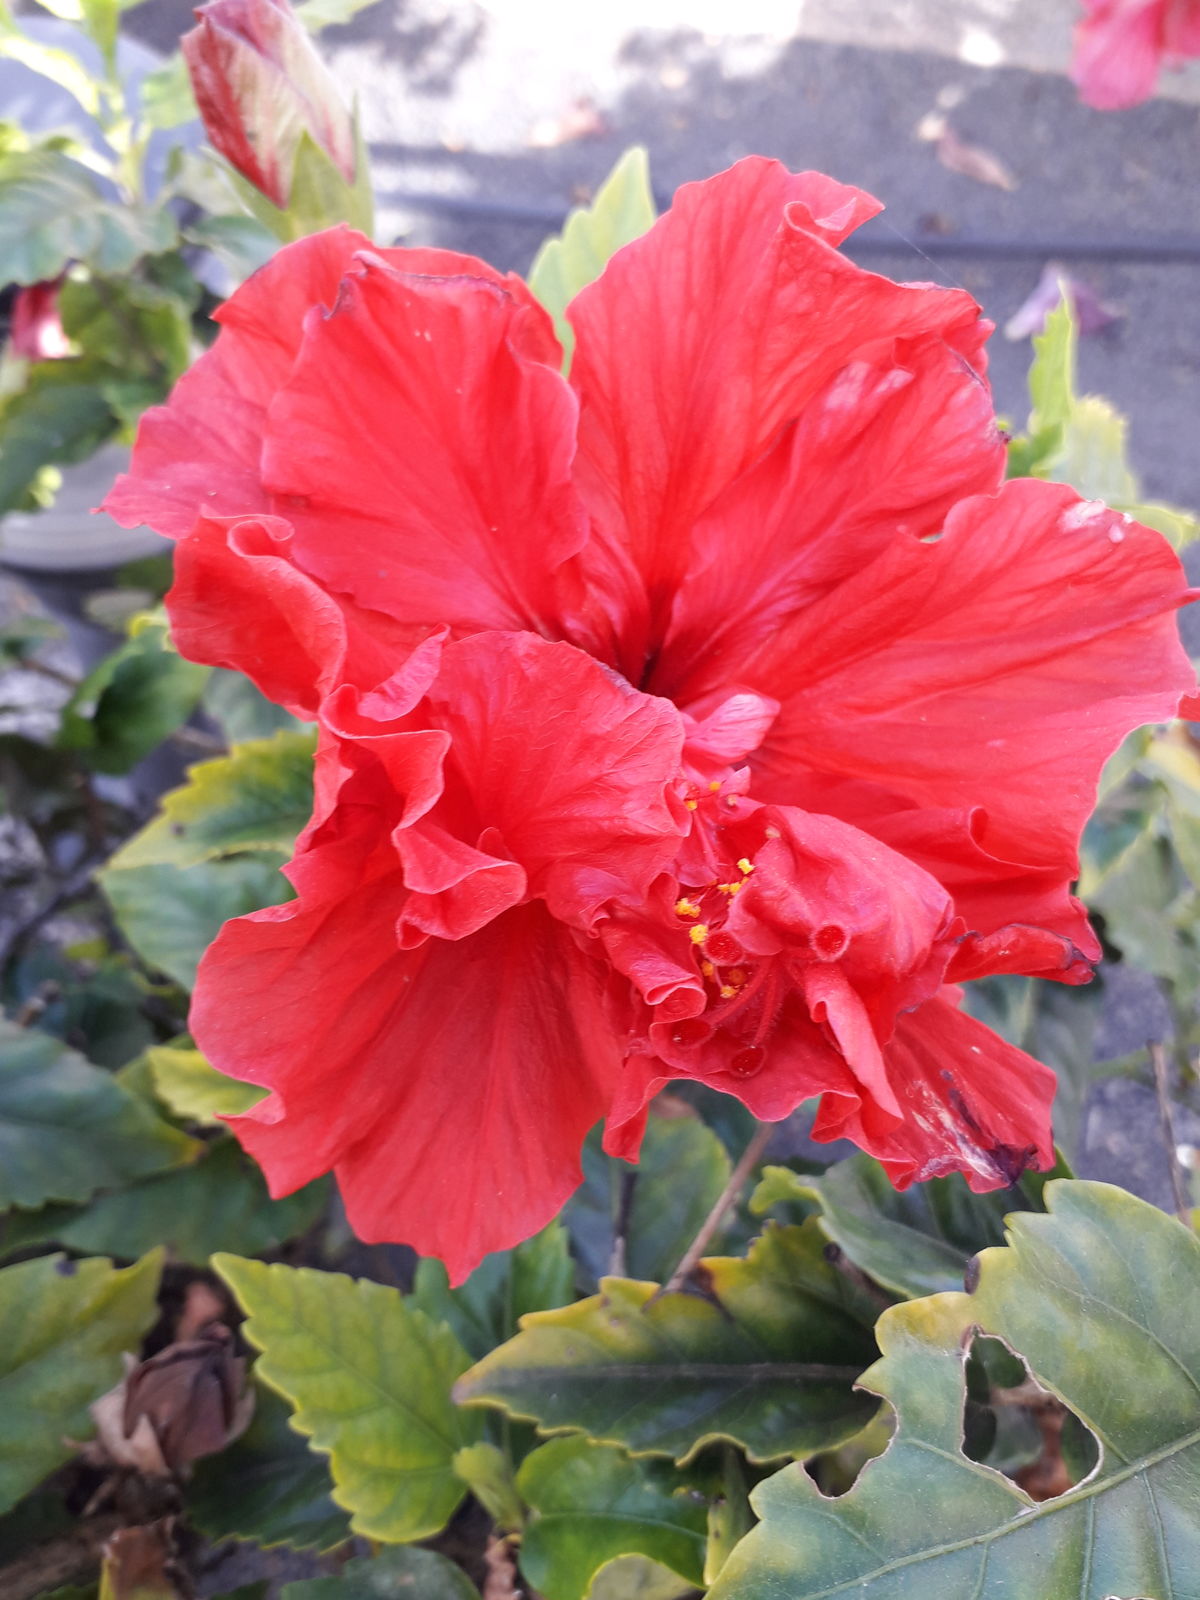 Hibiscus Rosa Sinensis L Plants Of The World Online Kew Science,Baggage Allowance United Airlines